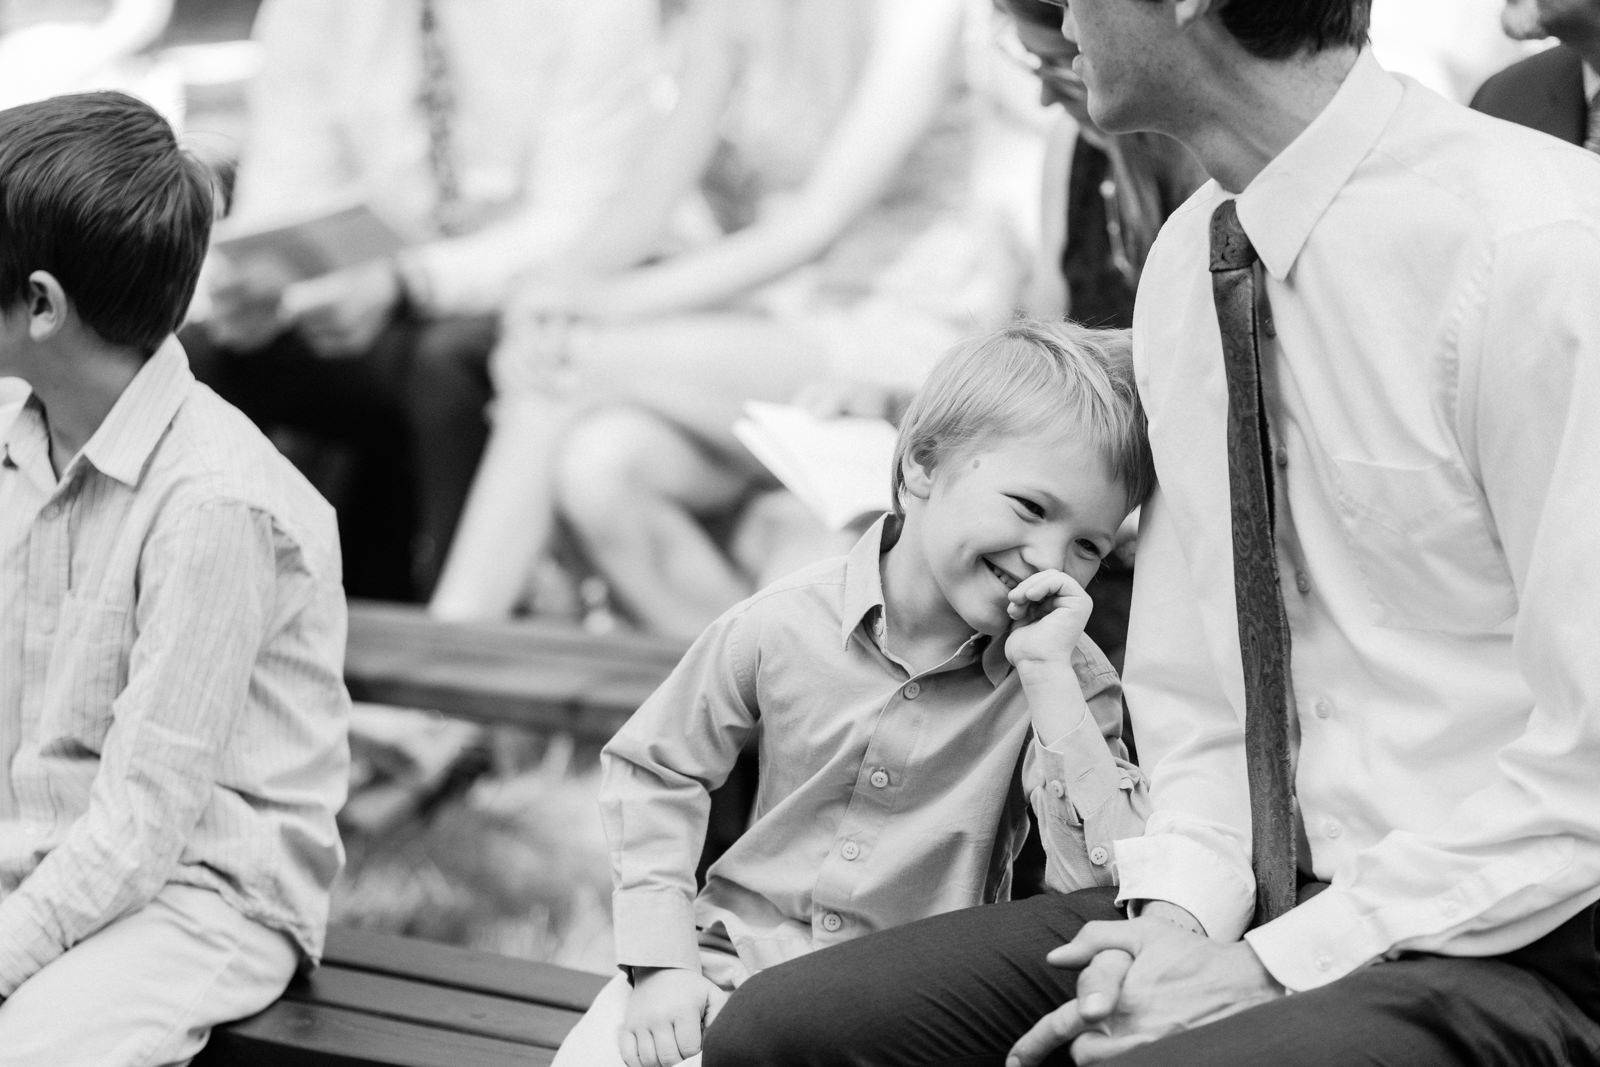  Boy waits and laughs with father on wedding ceremony benches 